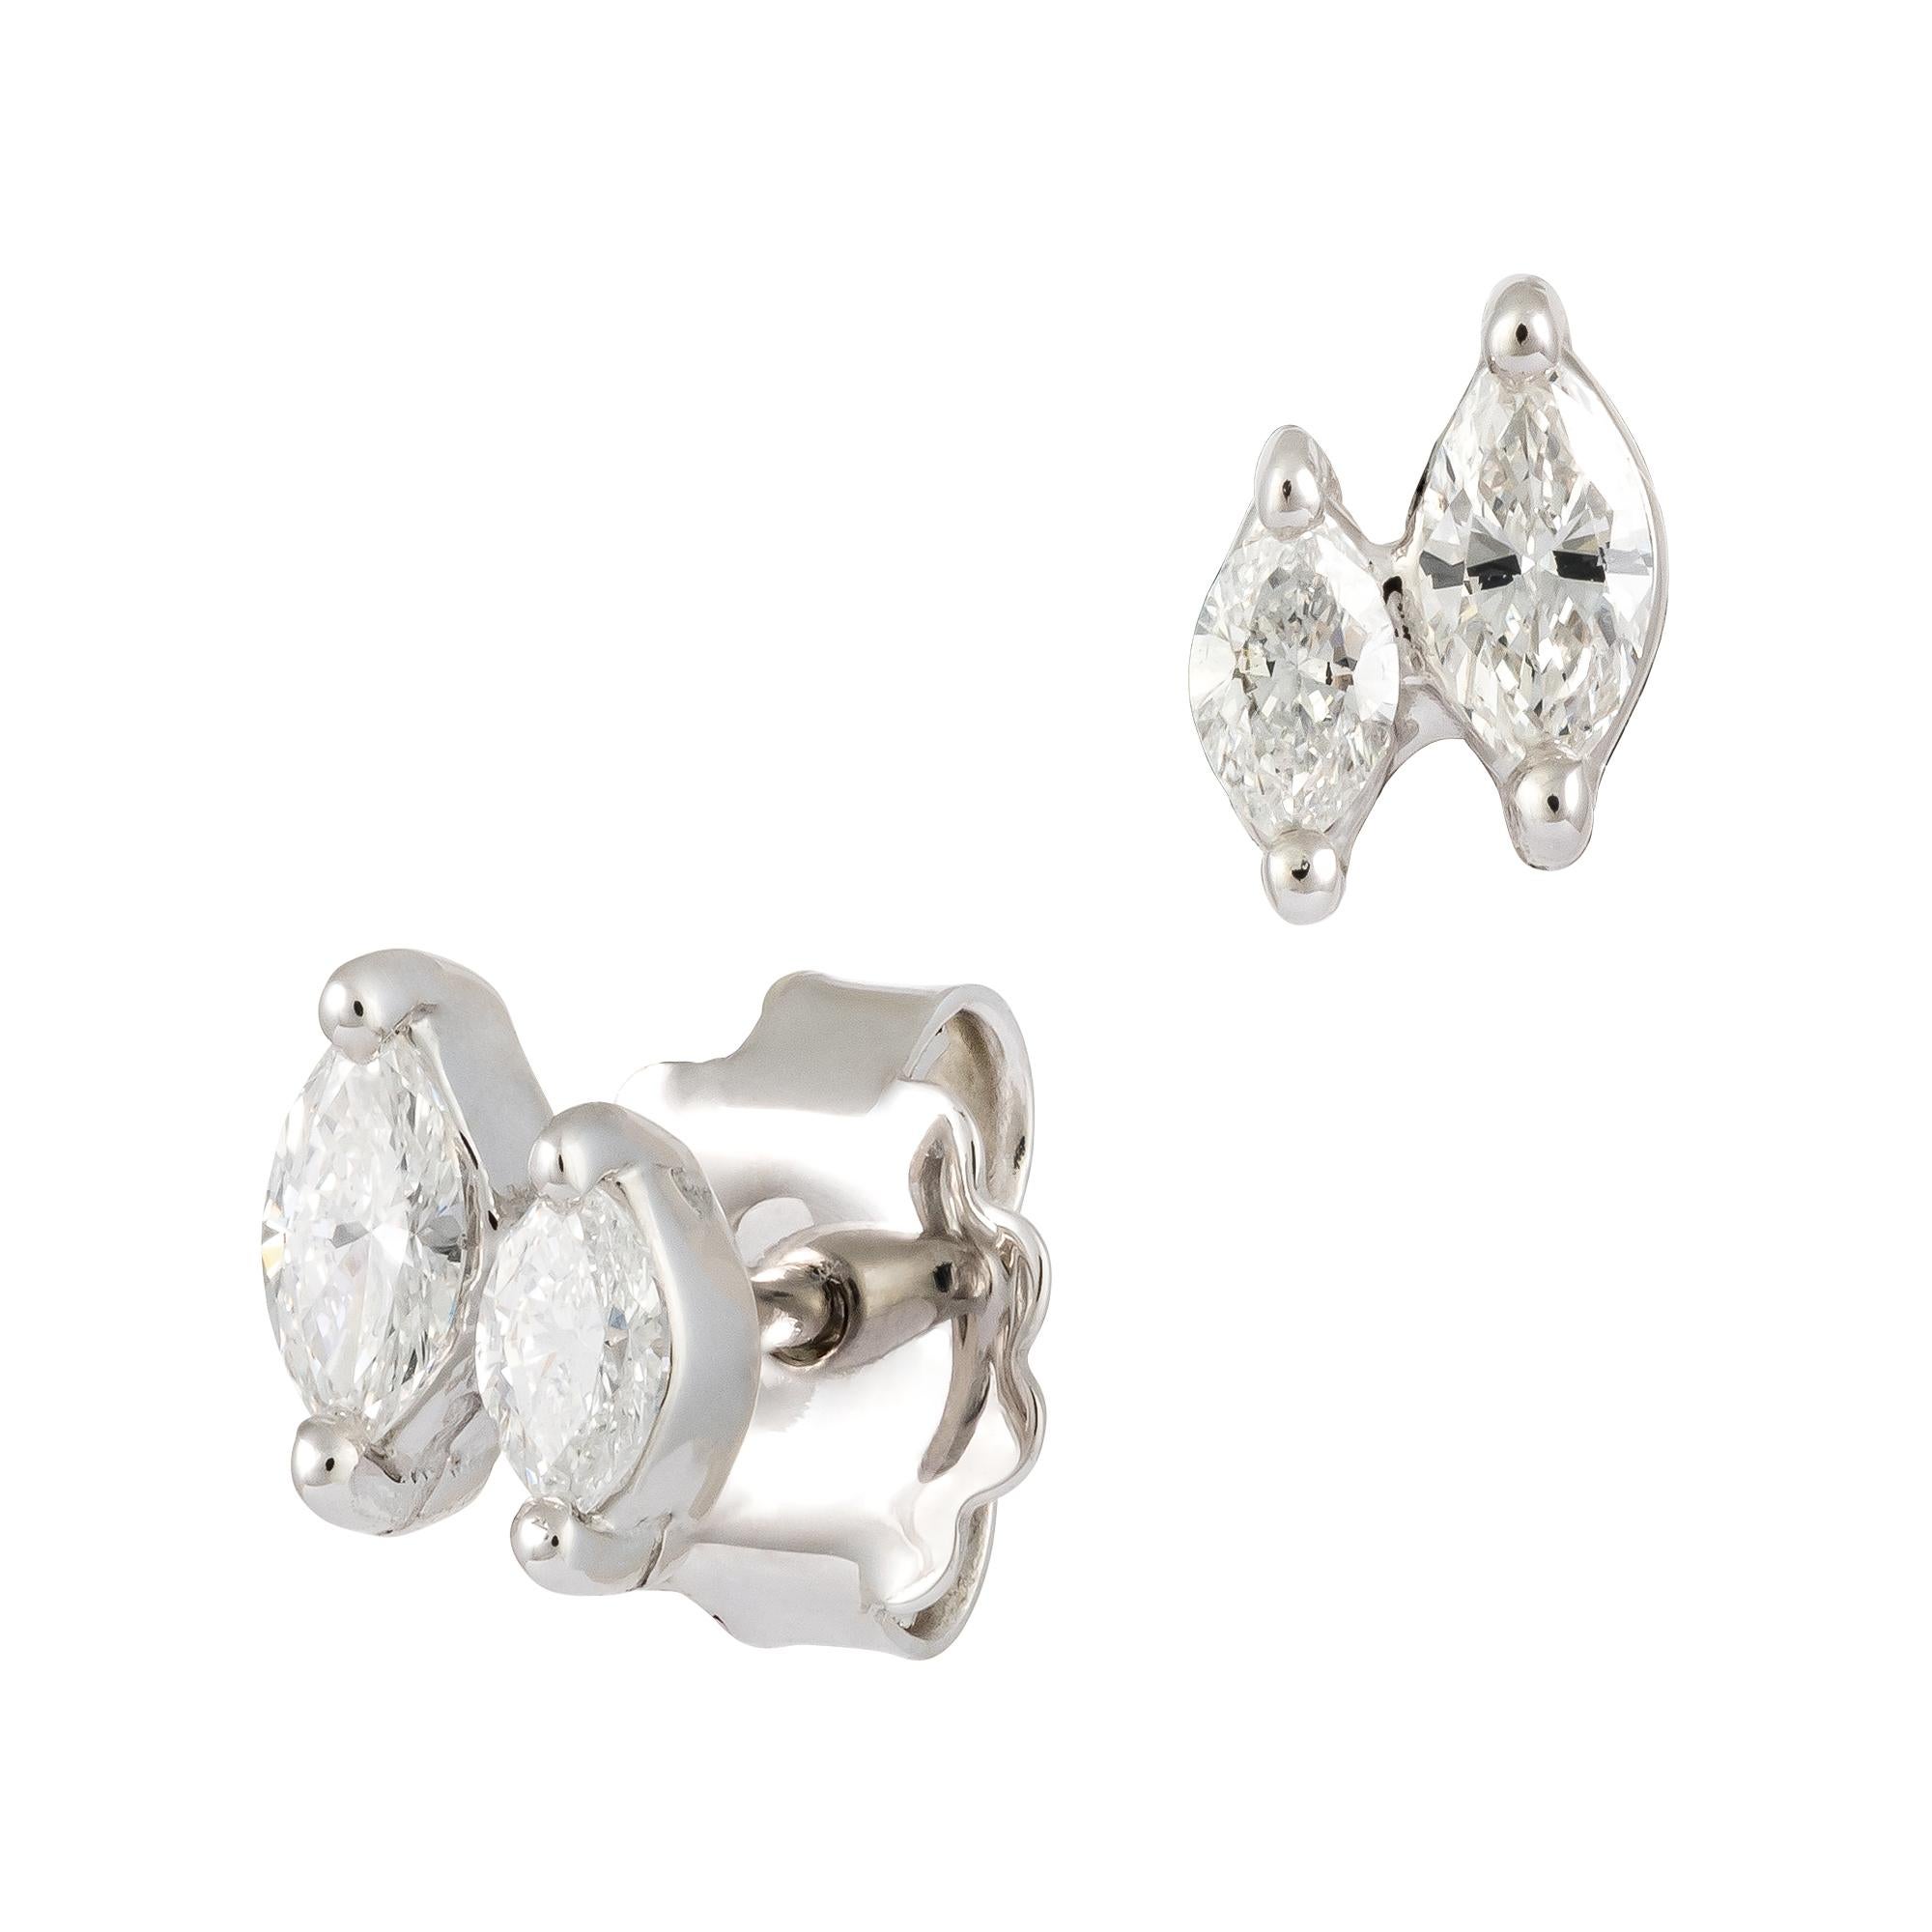 The Following Items we are offering is a Rare Important Radiant 18KT White Gold Stunning Double Diamond Stud Earrings. Earrings feature Magnificent Rare Sparkling Fine Glittering Marquise Diamonds!! T.C.W. Approx .38CTS!!! These Gorgeous Pair of